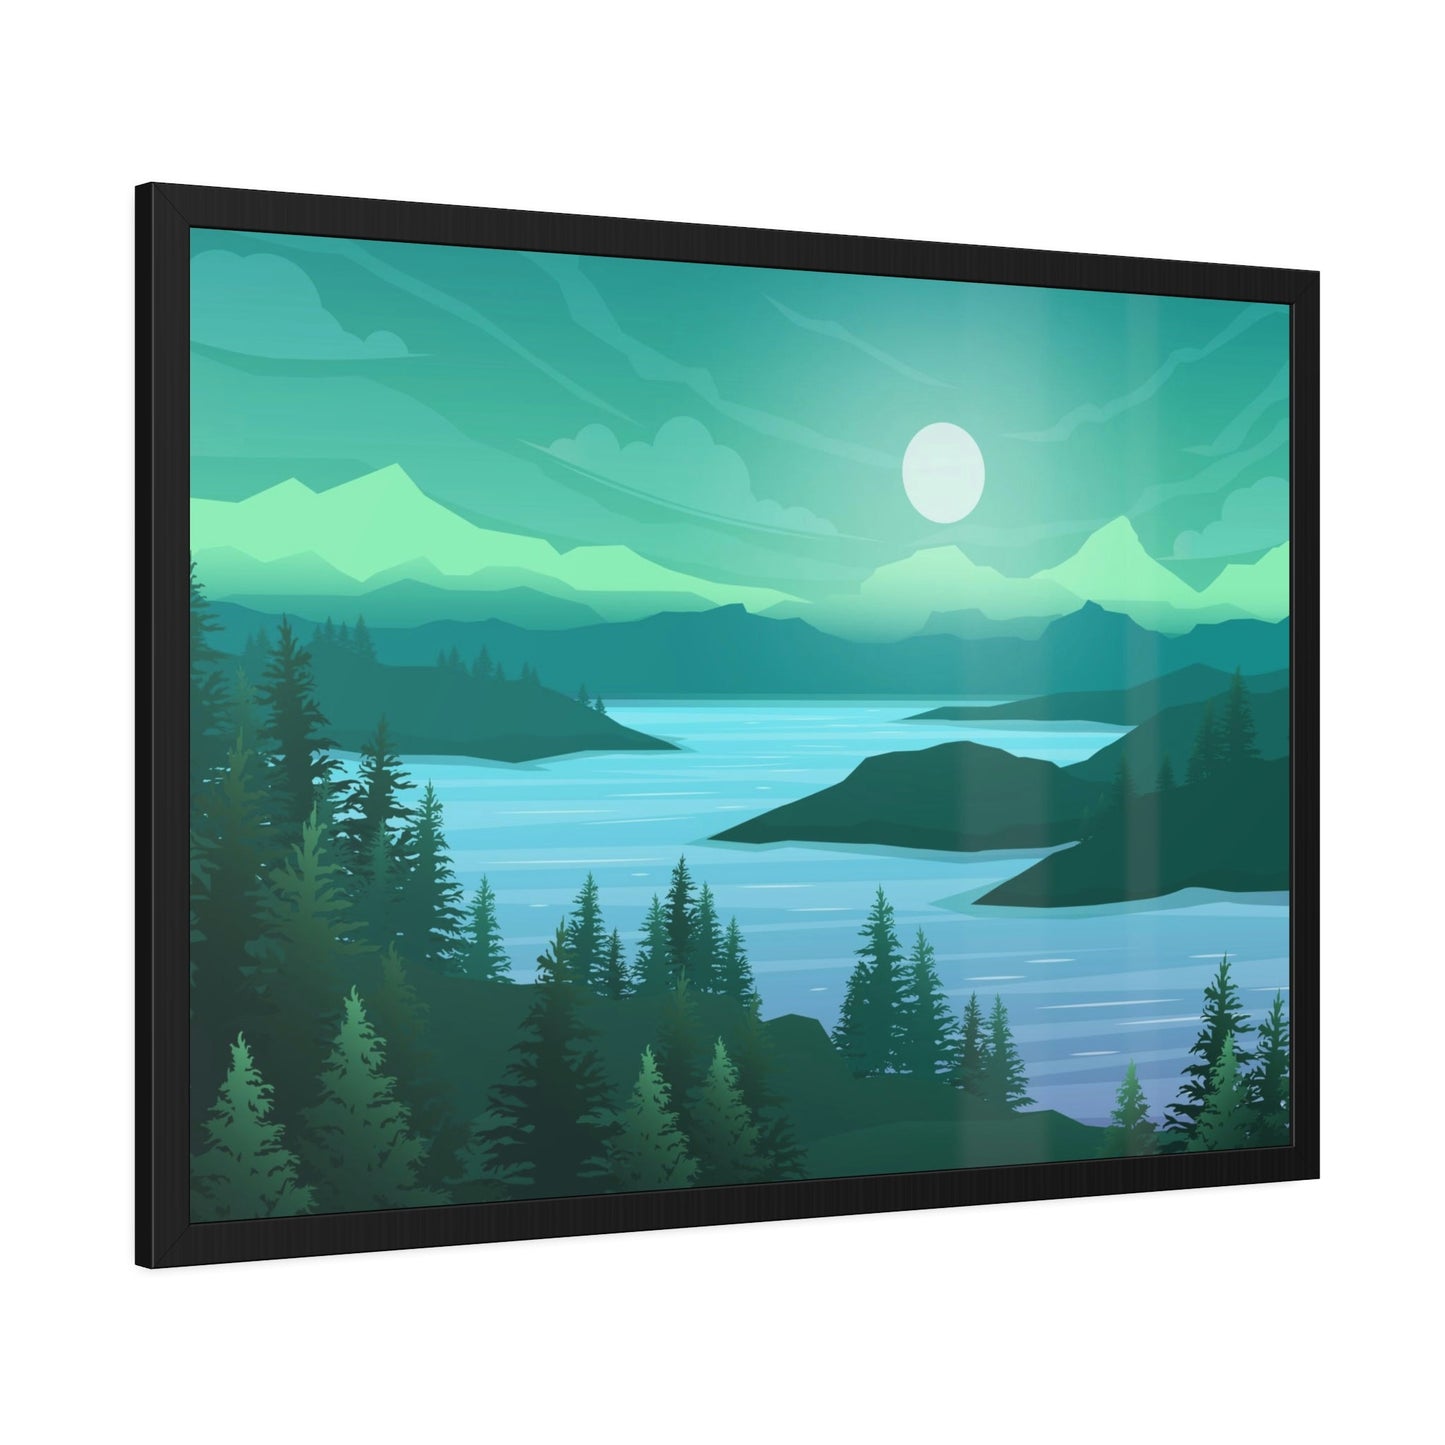 Calming Waters: Framed Poster of a Relaxing Lake on Canvas